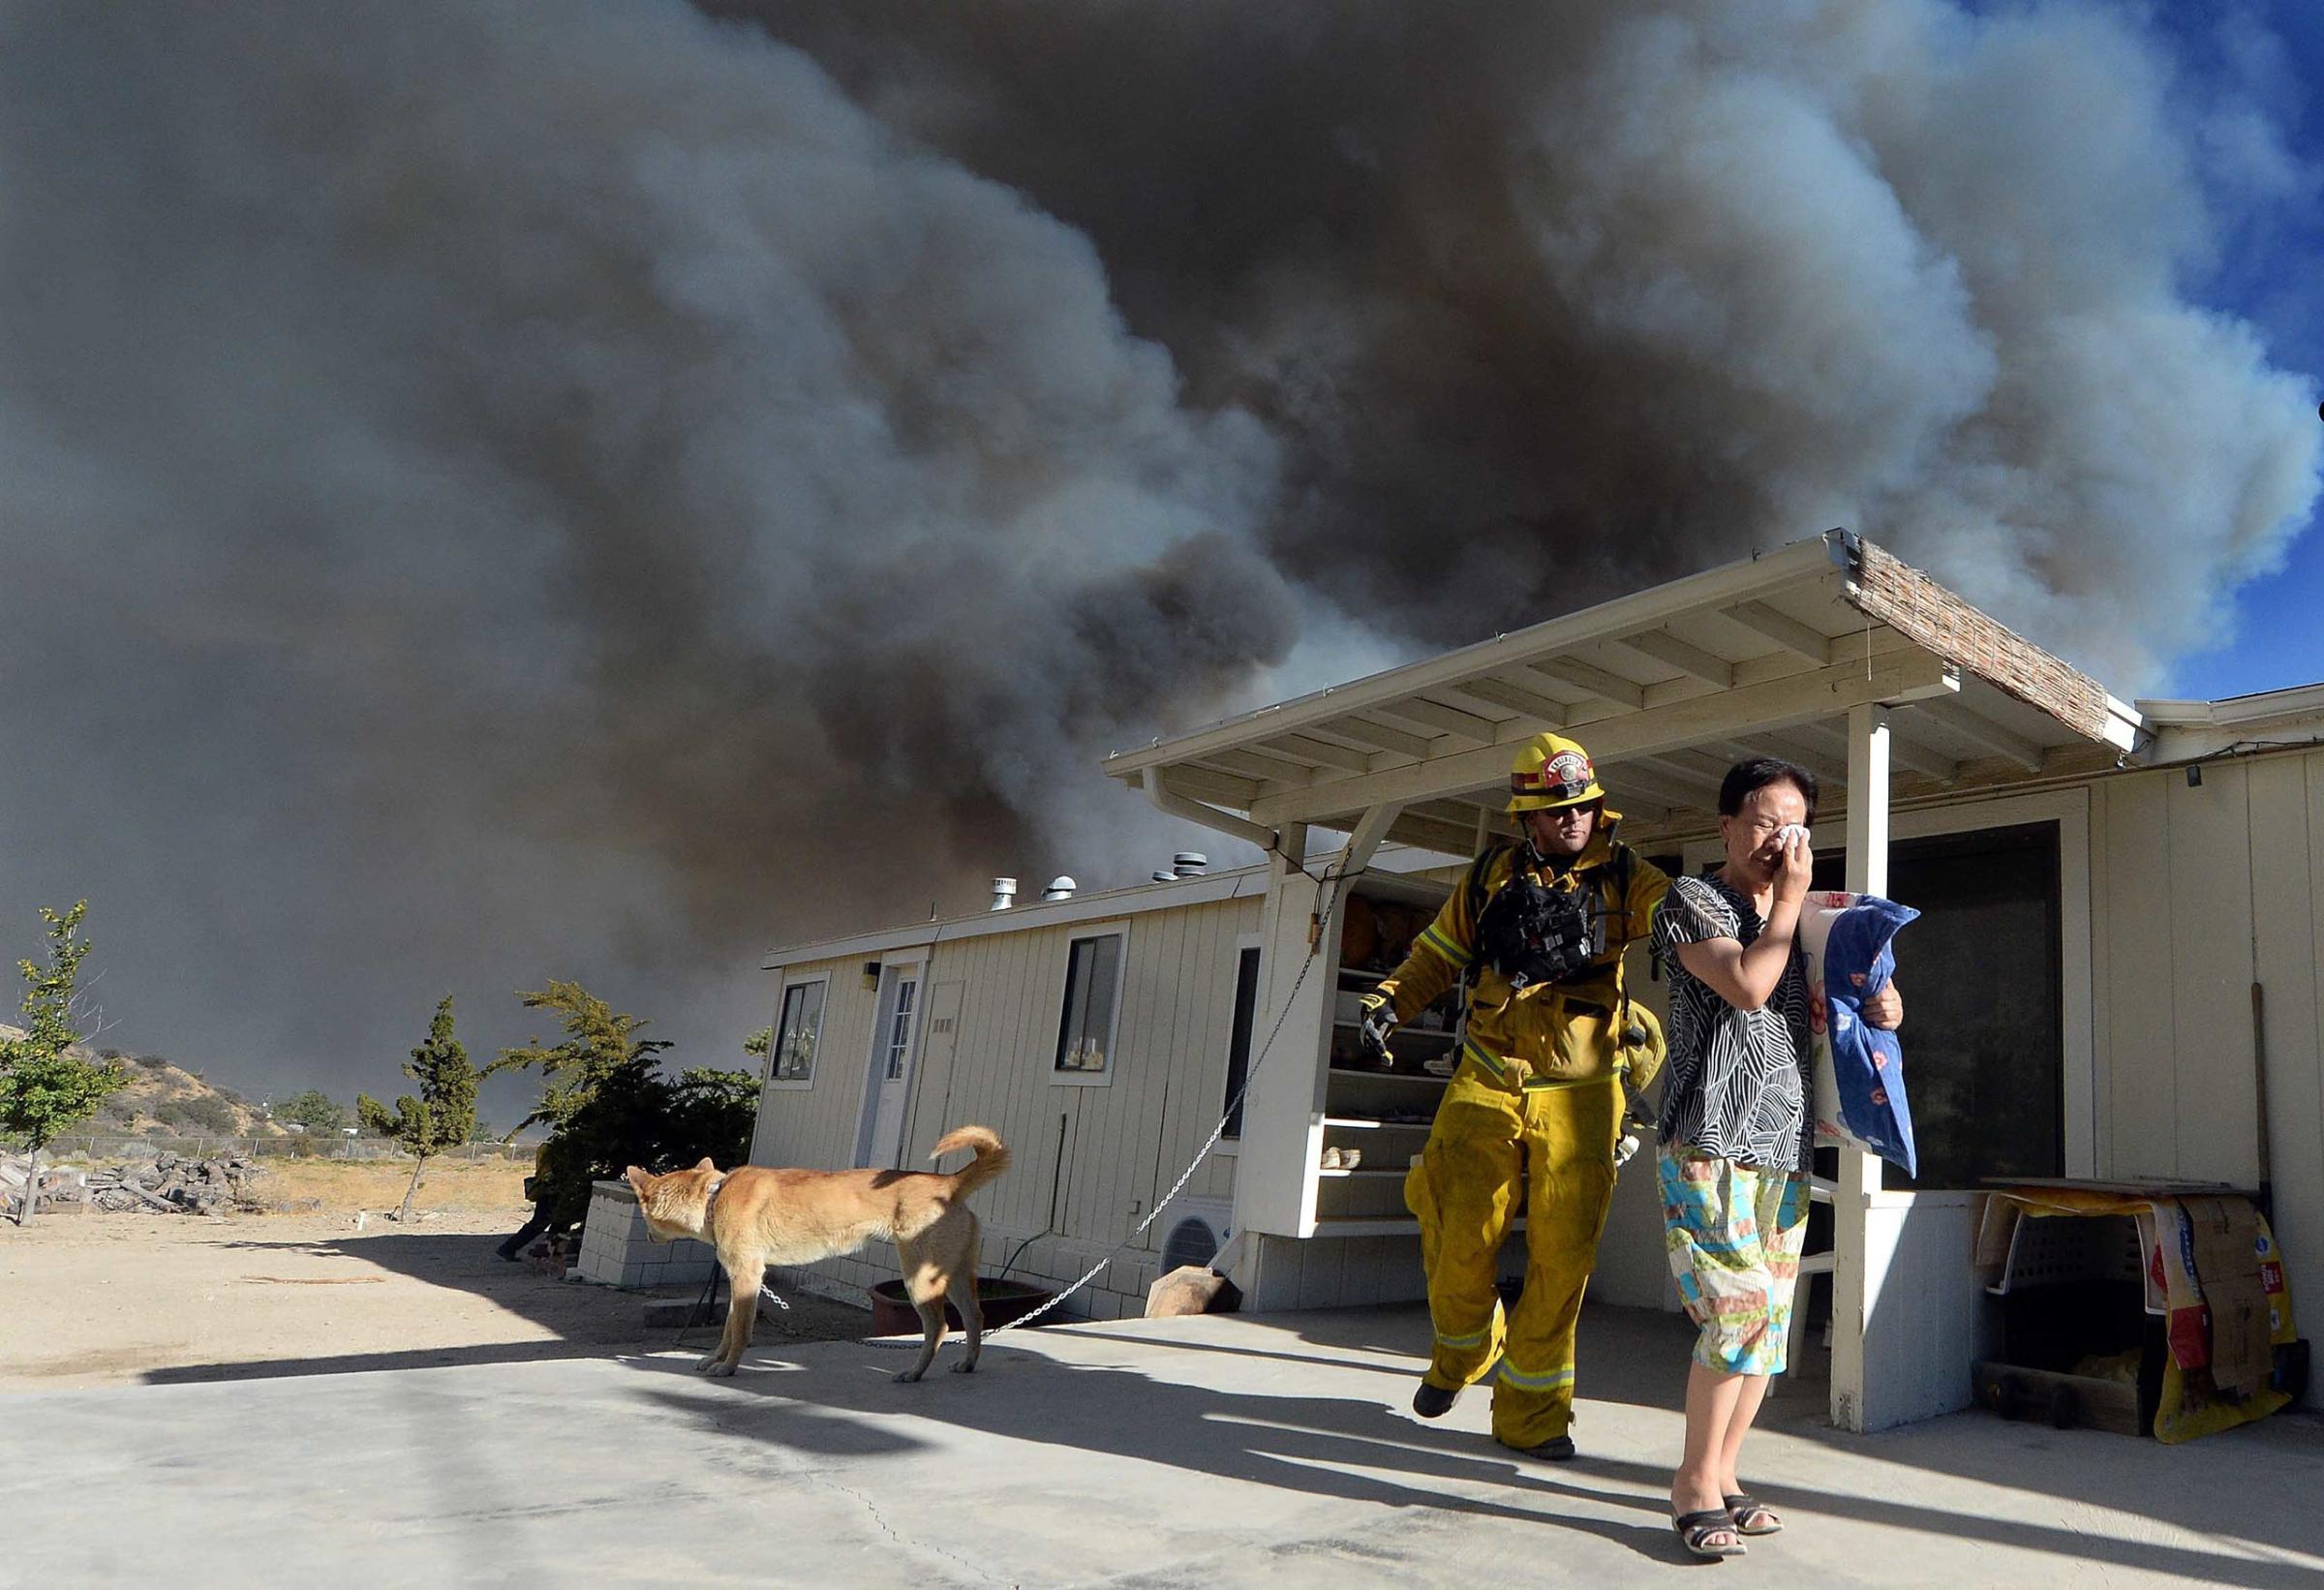 San Bernardino County Firefighter, Engineer, and Paramedic, Jeremy Pendergraft, helps a couple evacuate out of their home as she cries off of Hess Rd. as a wildfire off of Hwy 138 quickly approaches in San Bernardino, Calif., Aug. 16, 2016.